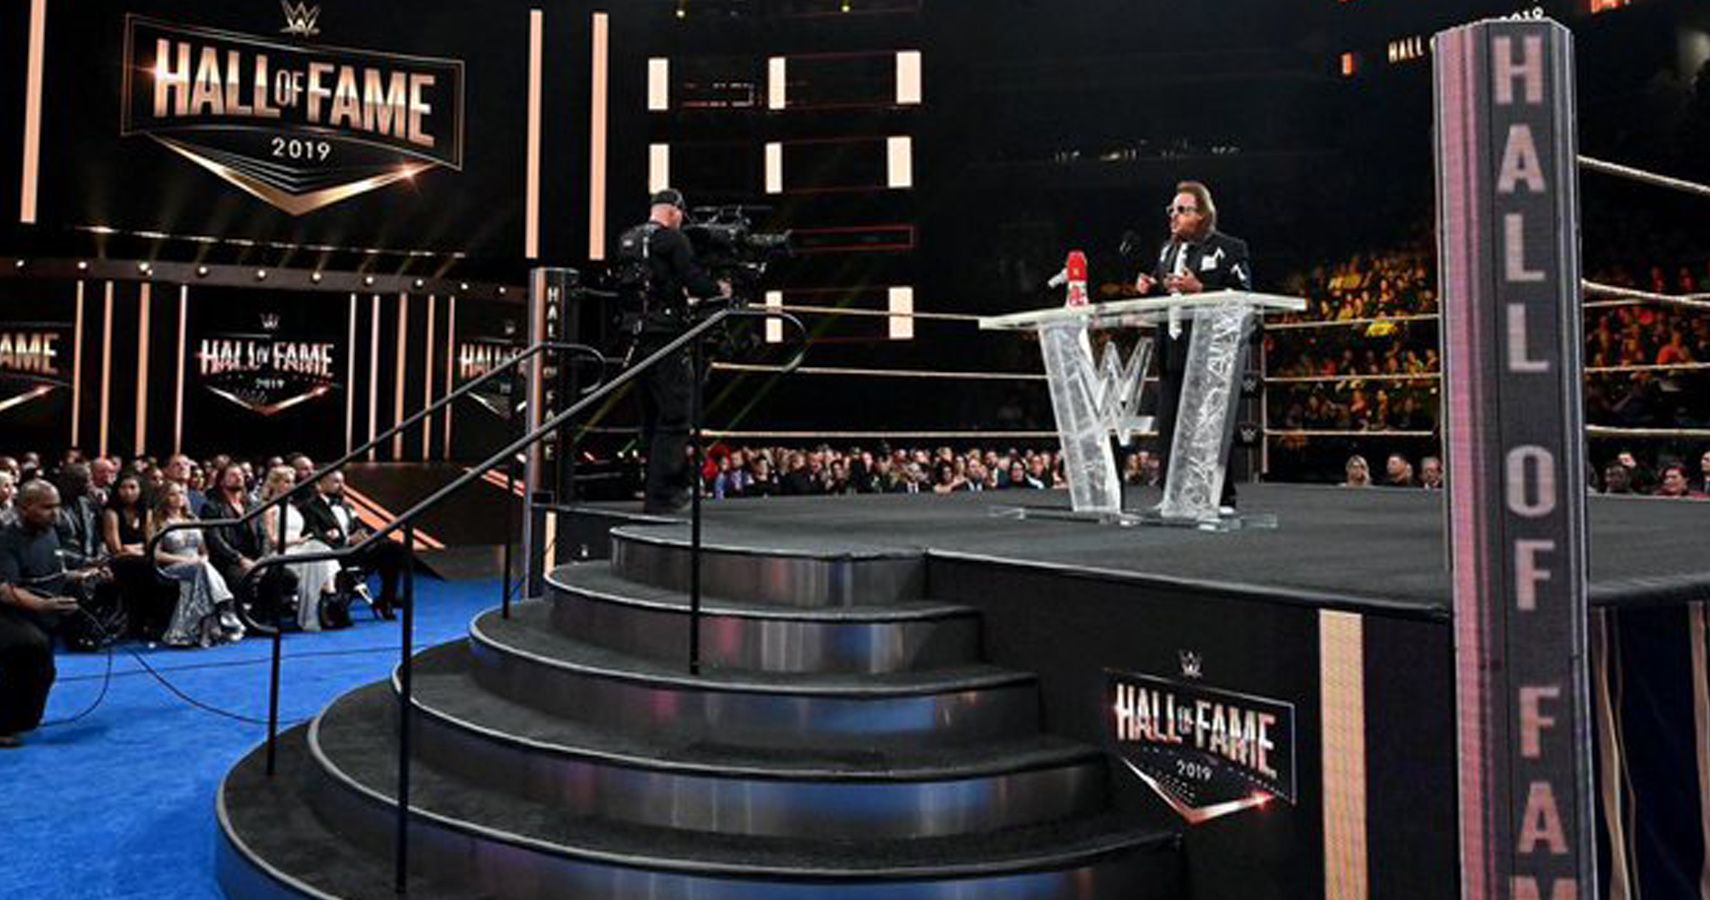 WWE Working On A Virtual Hall Of Fame Ceremony For This Year